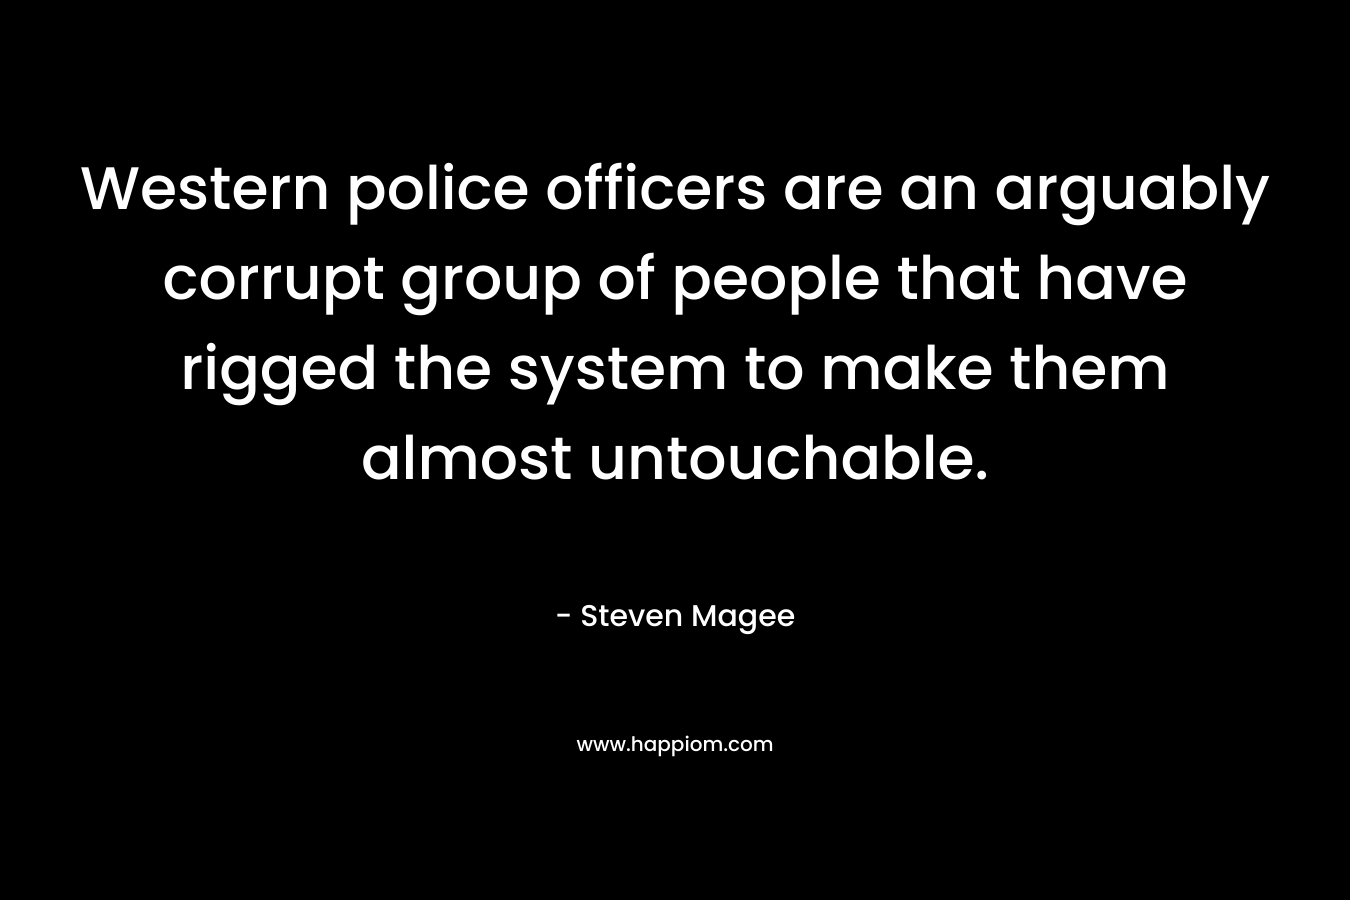 Western police officers are an arguably corrupt group of people that have rigged the system to make them almost untouchable.